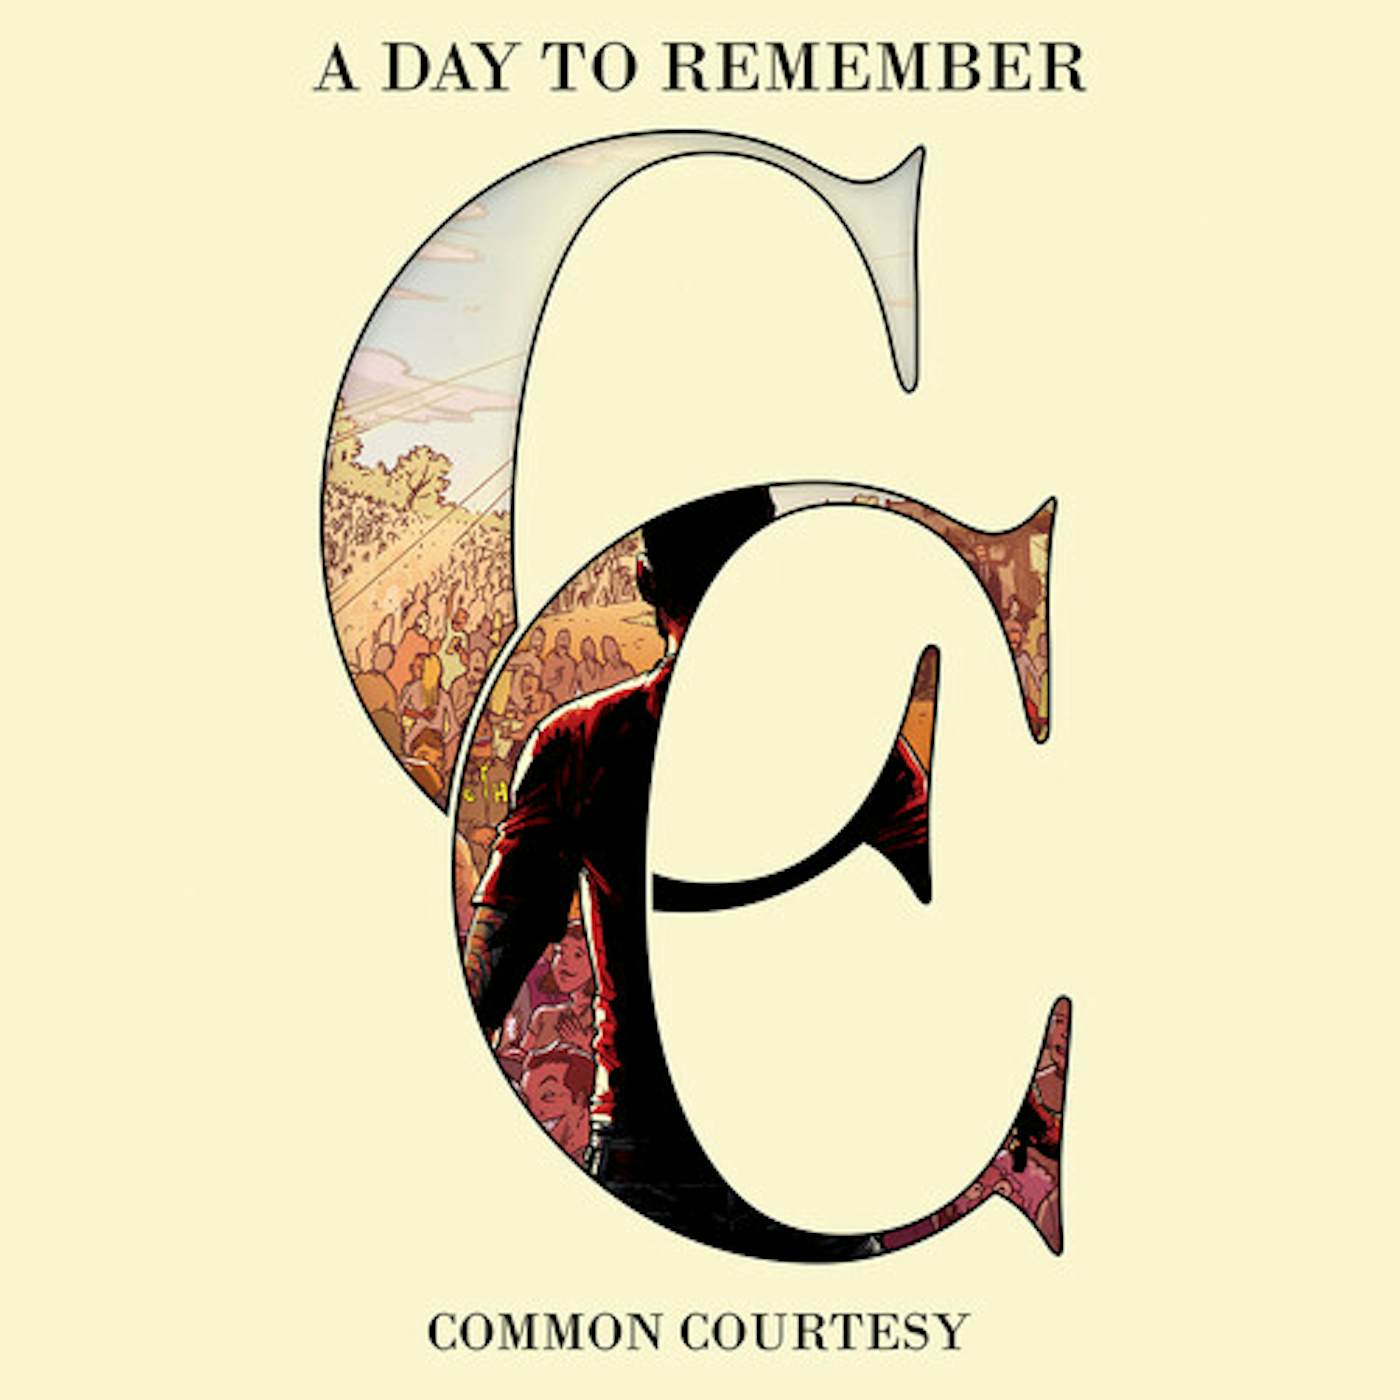 A Day To Remember COMMON COURTESY CD